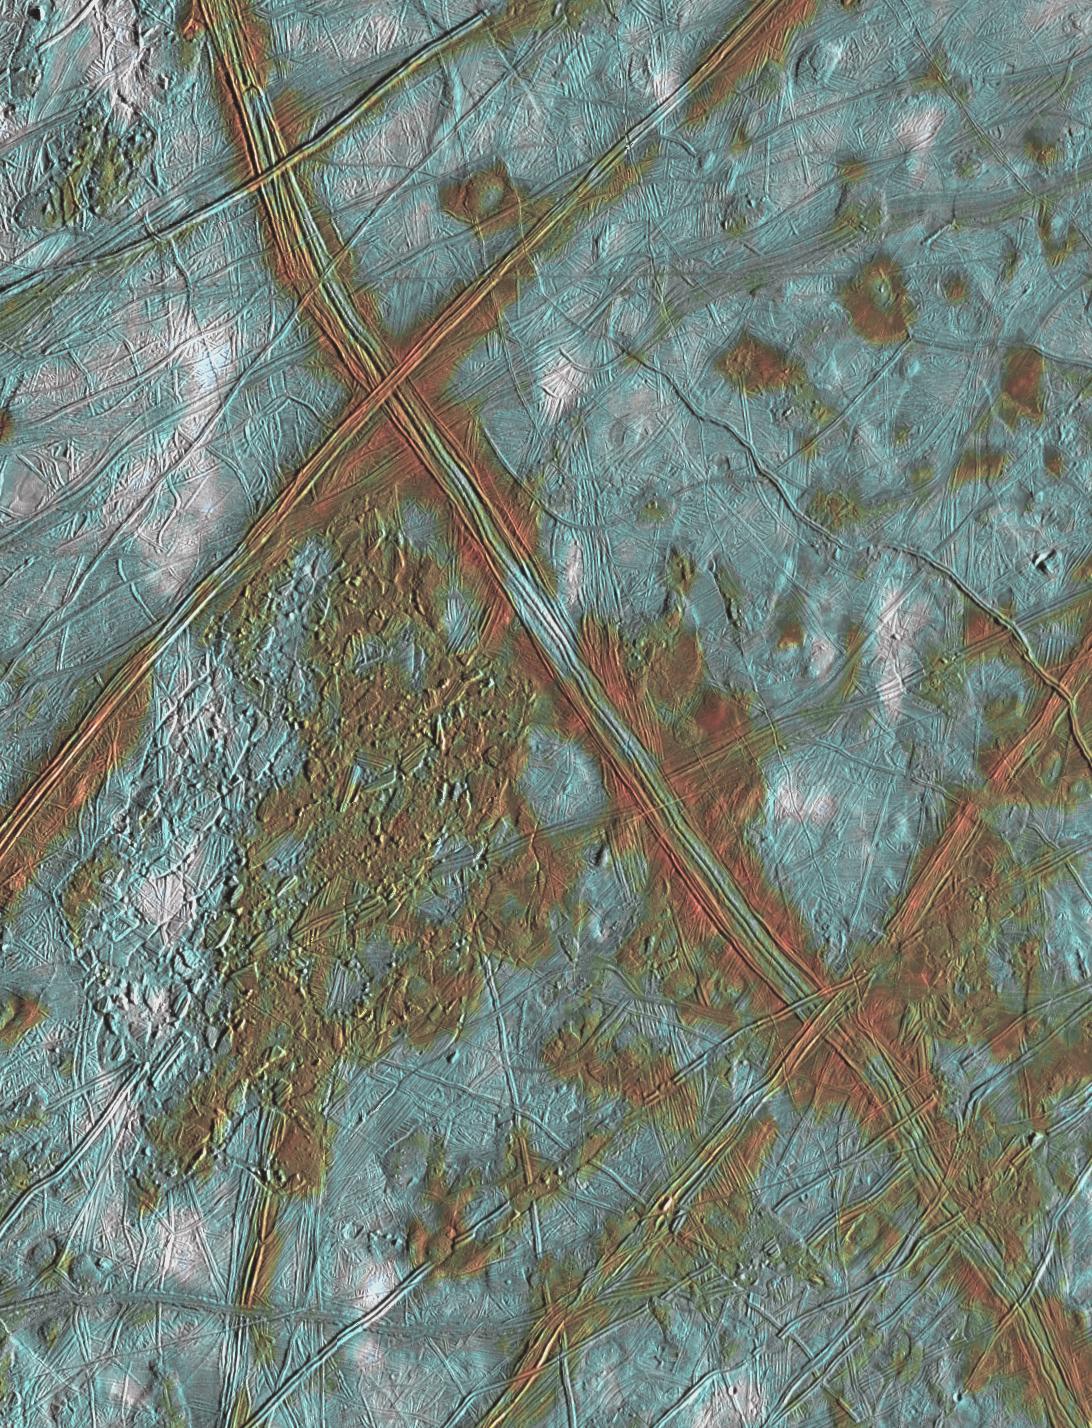 color view of complex terrain on an icy surface